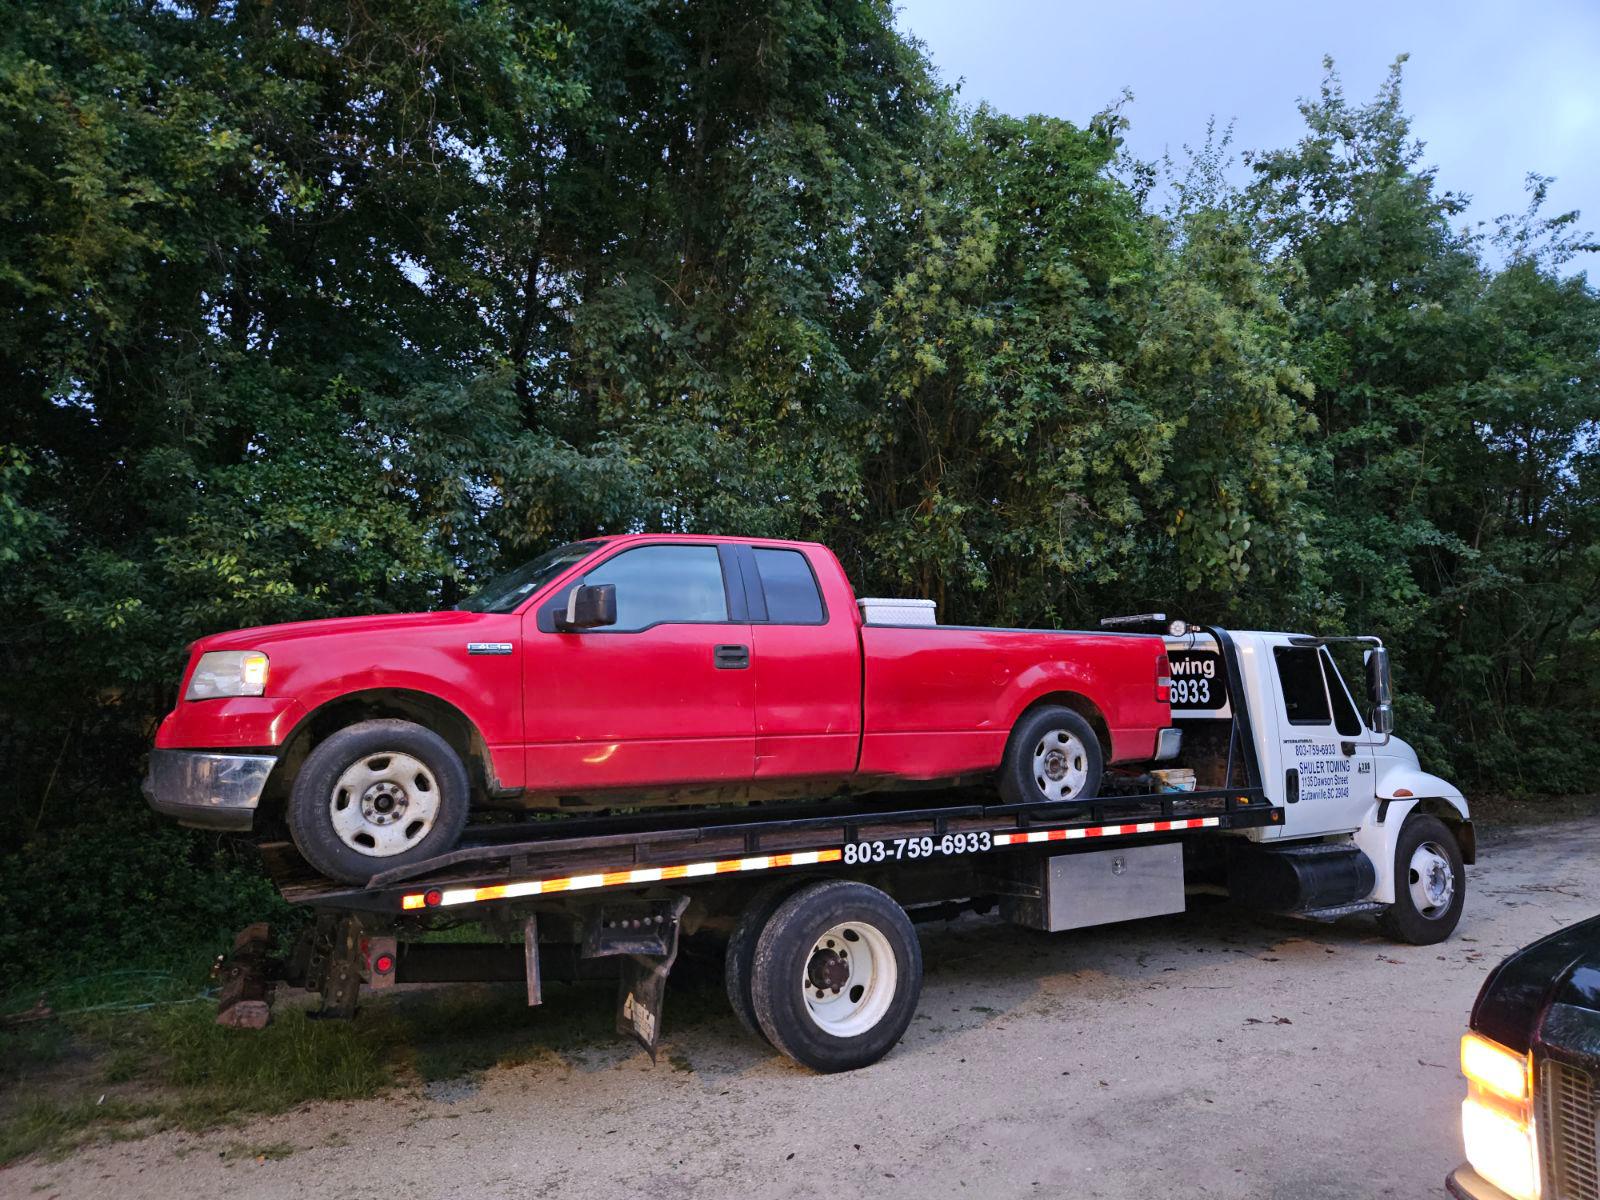 Shuler Towing, LLC offers dependable roadside assistance services to keep you moving with peace of mind. Whether you've run out of fuel, locked yourself out of your car, or encountered any other roadside issue, our team is here to provide the necessary support to get you back on track.